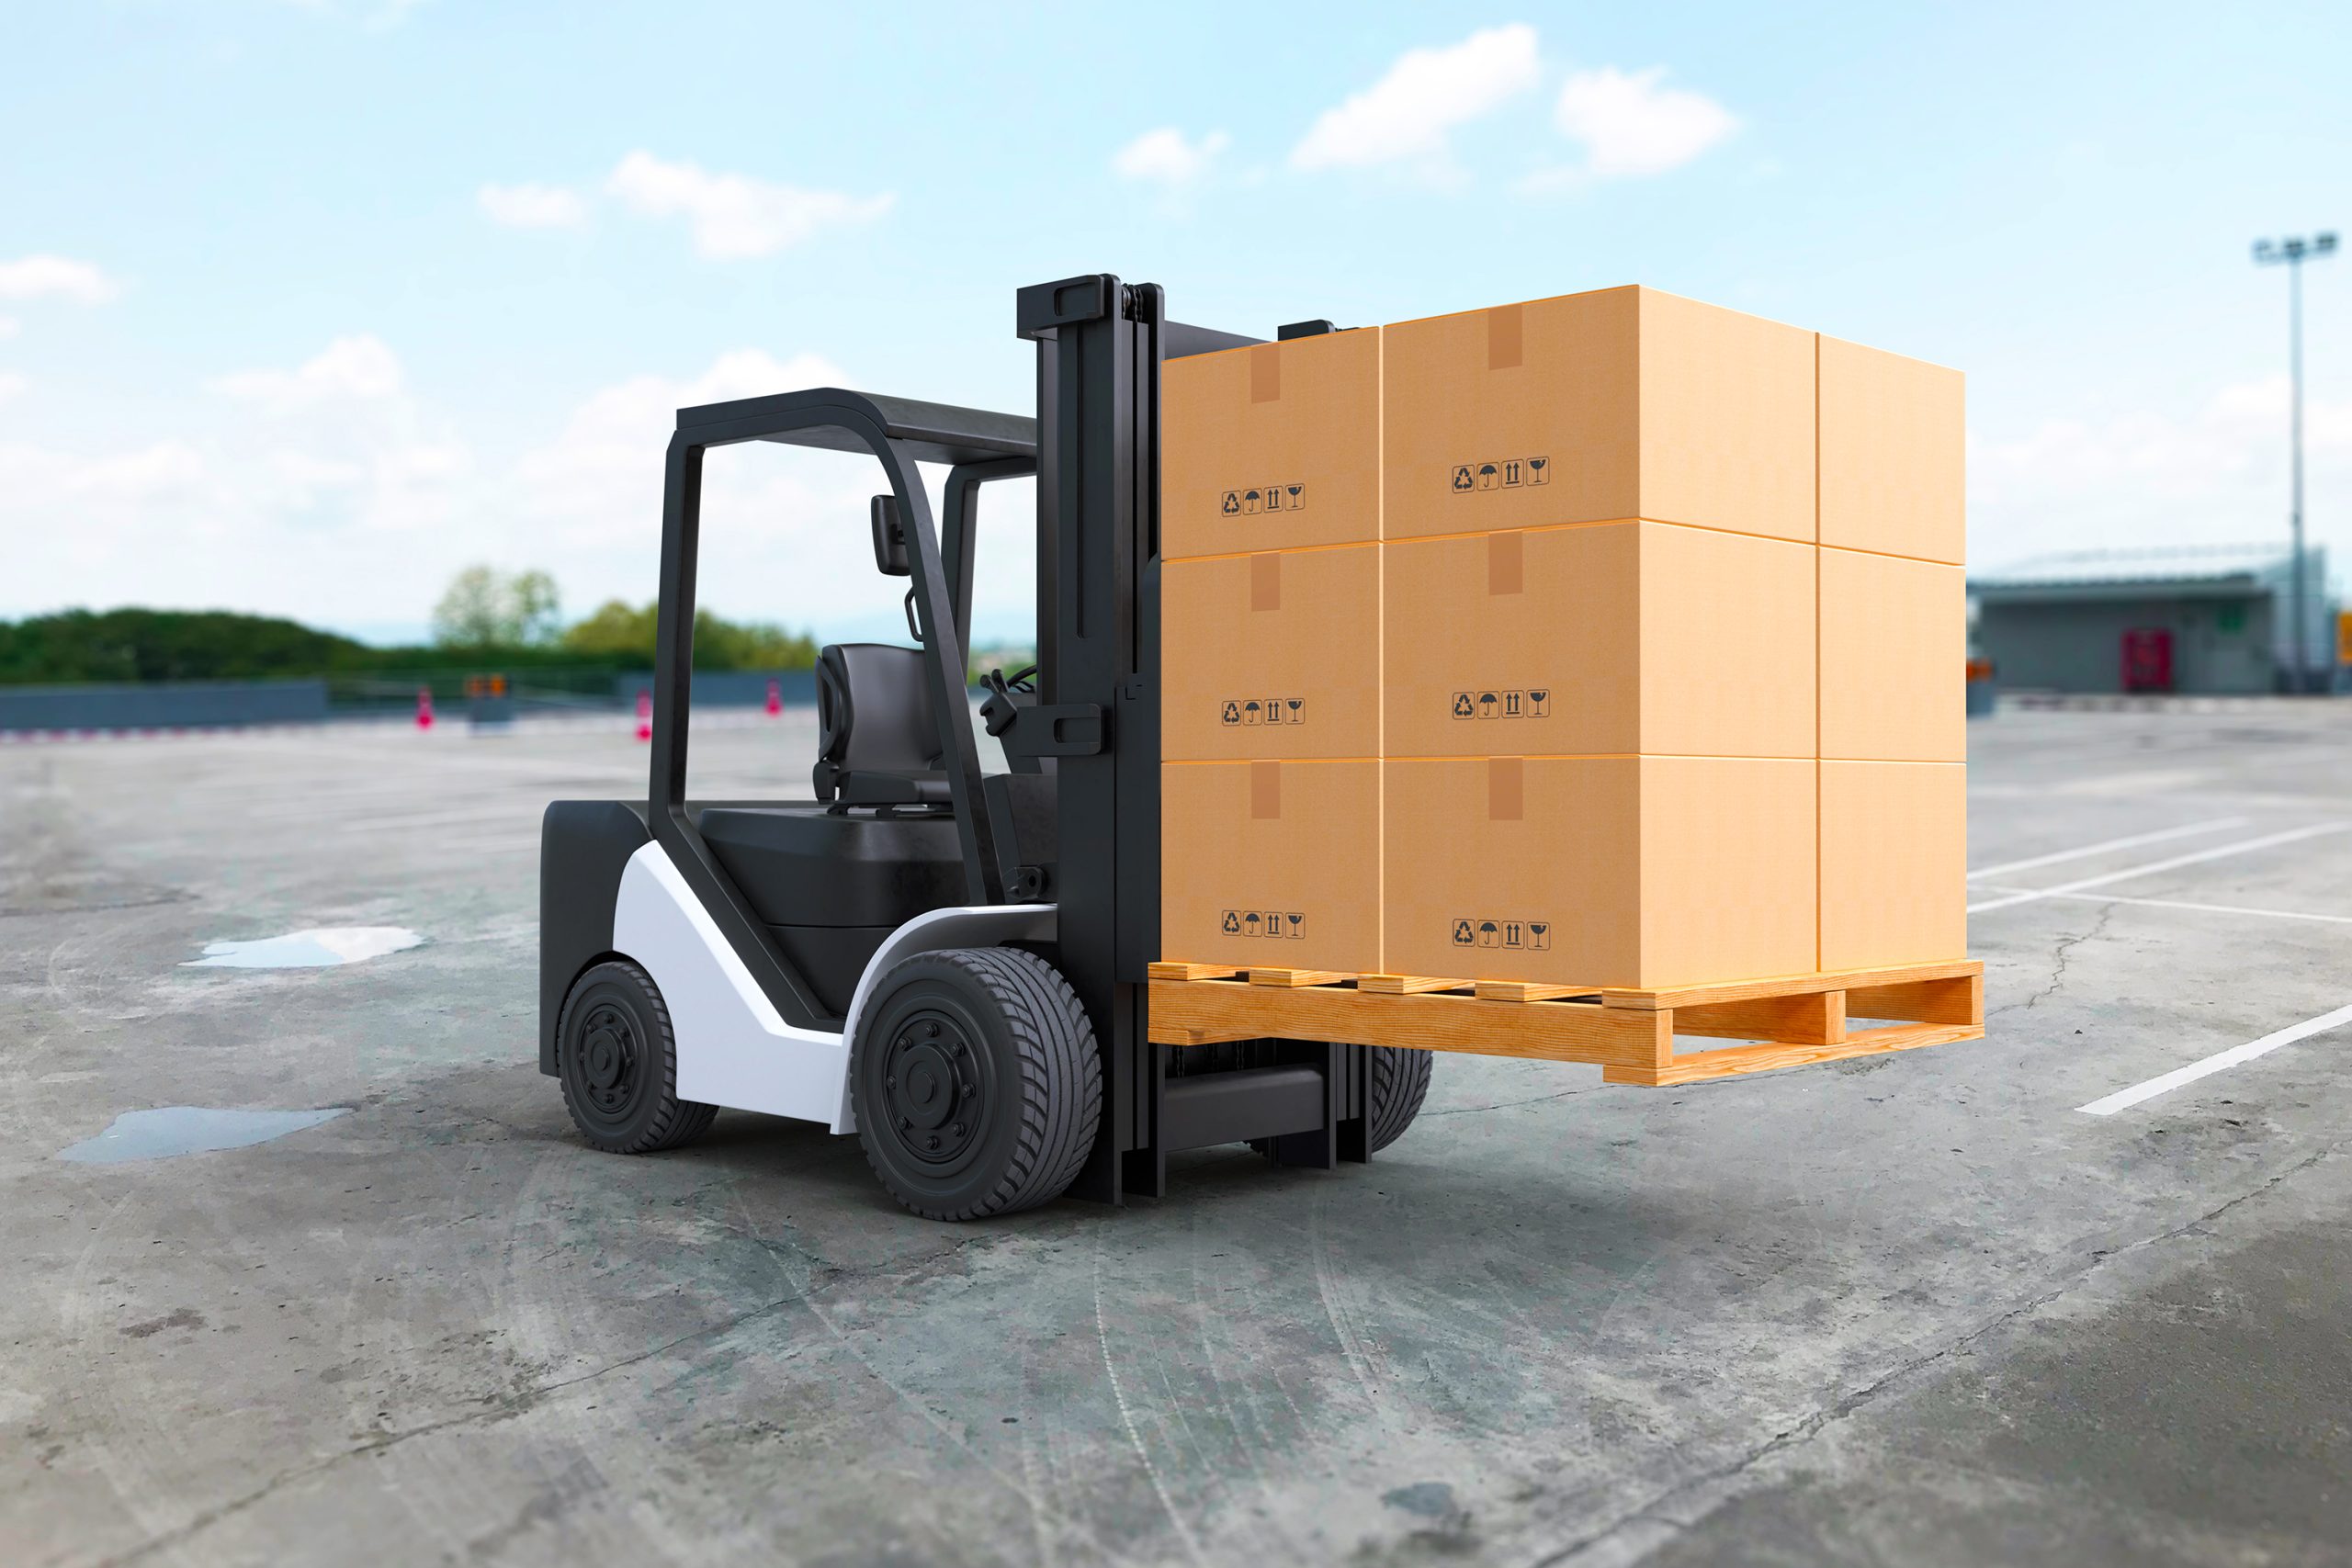 Forklift truck is lifting a pallet with cardboard boxes. 3D illustration